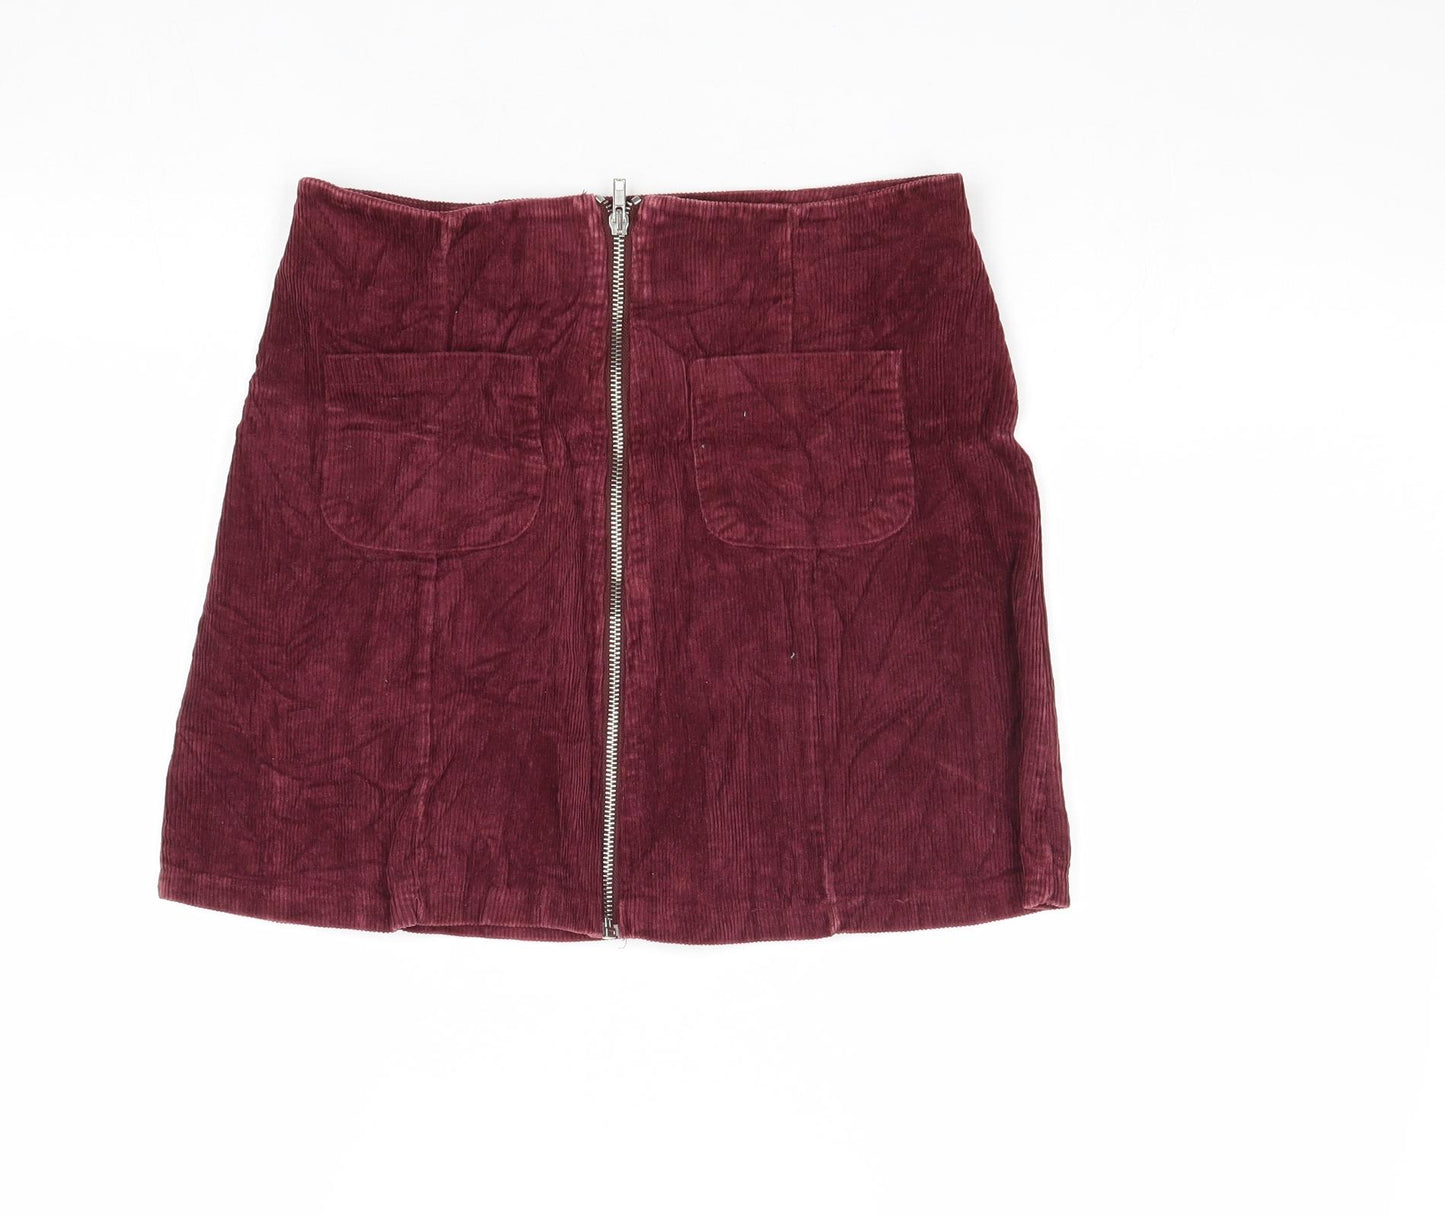 Brandy Melville Womens Red Cotton Mini Skirt Size 28 in Zip